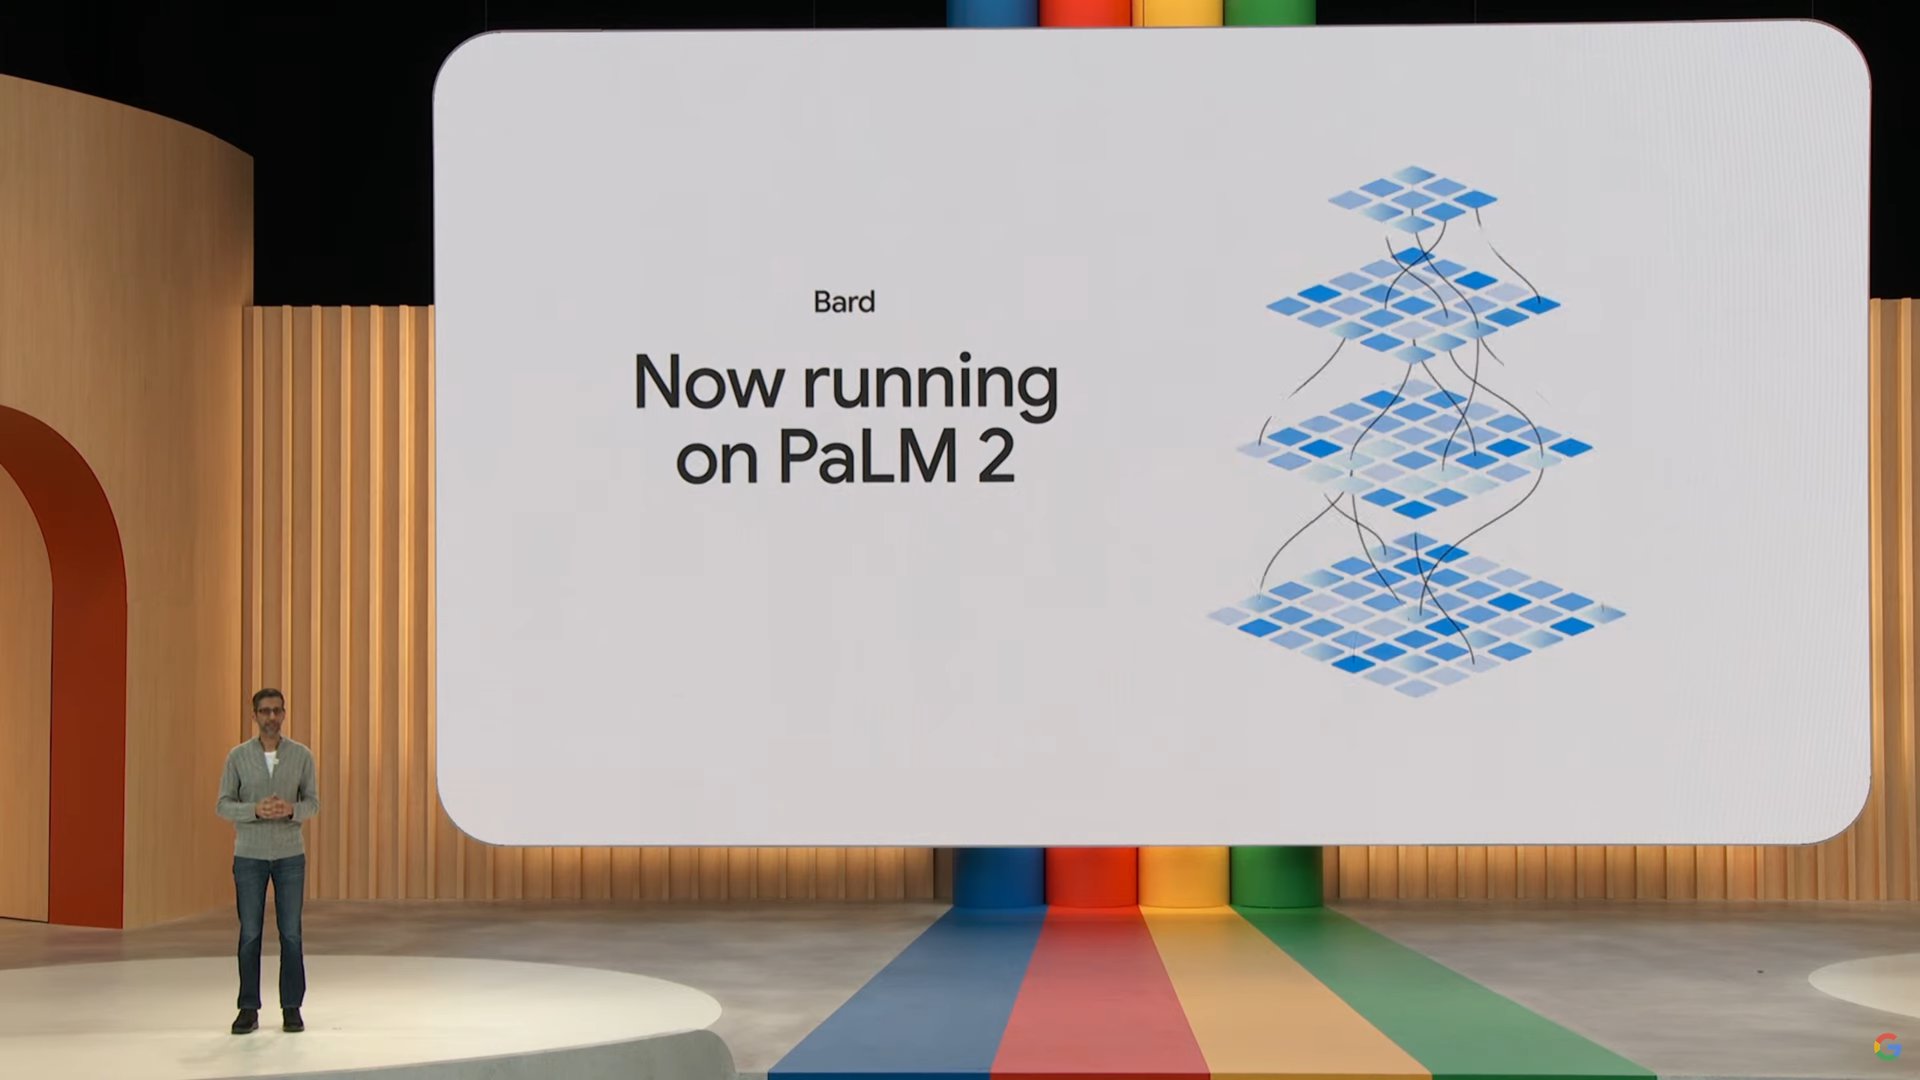 Google Bard gains a huge upgrade thanks to PaLM 2